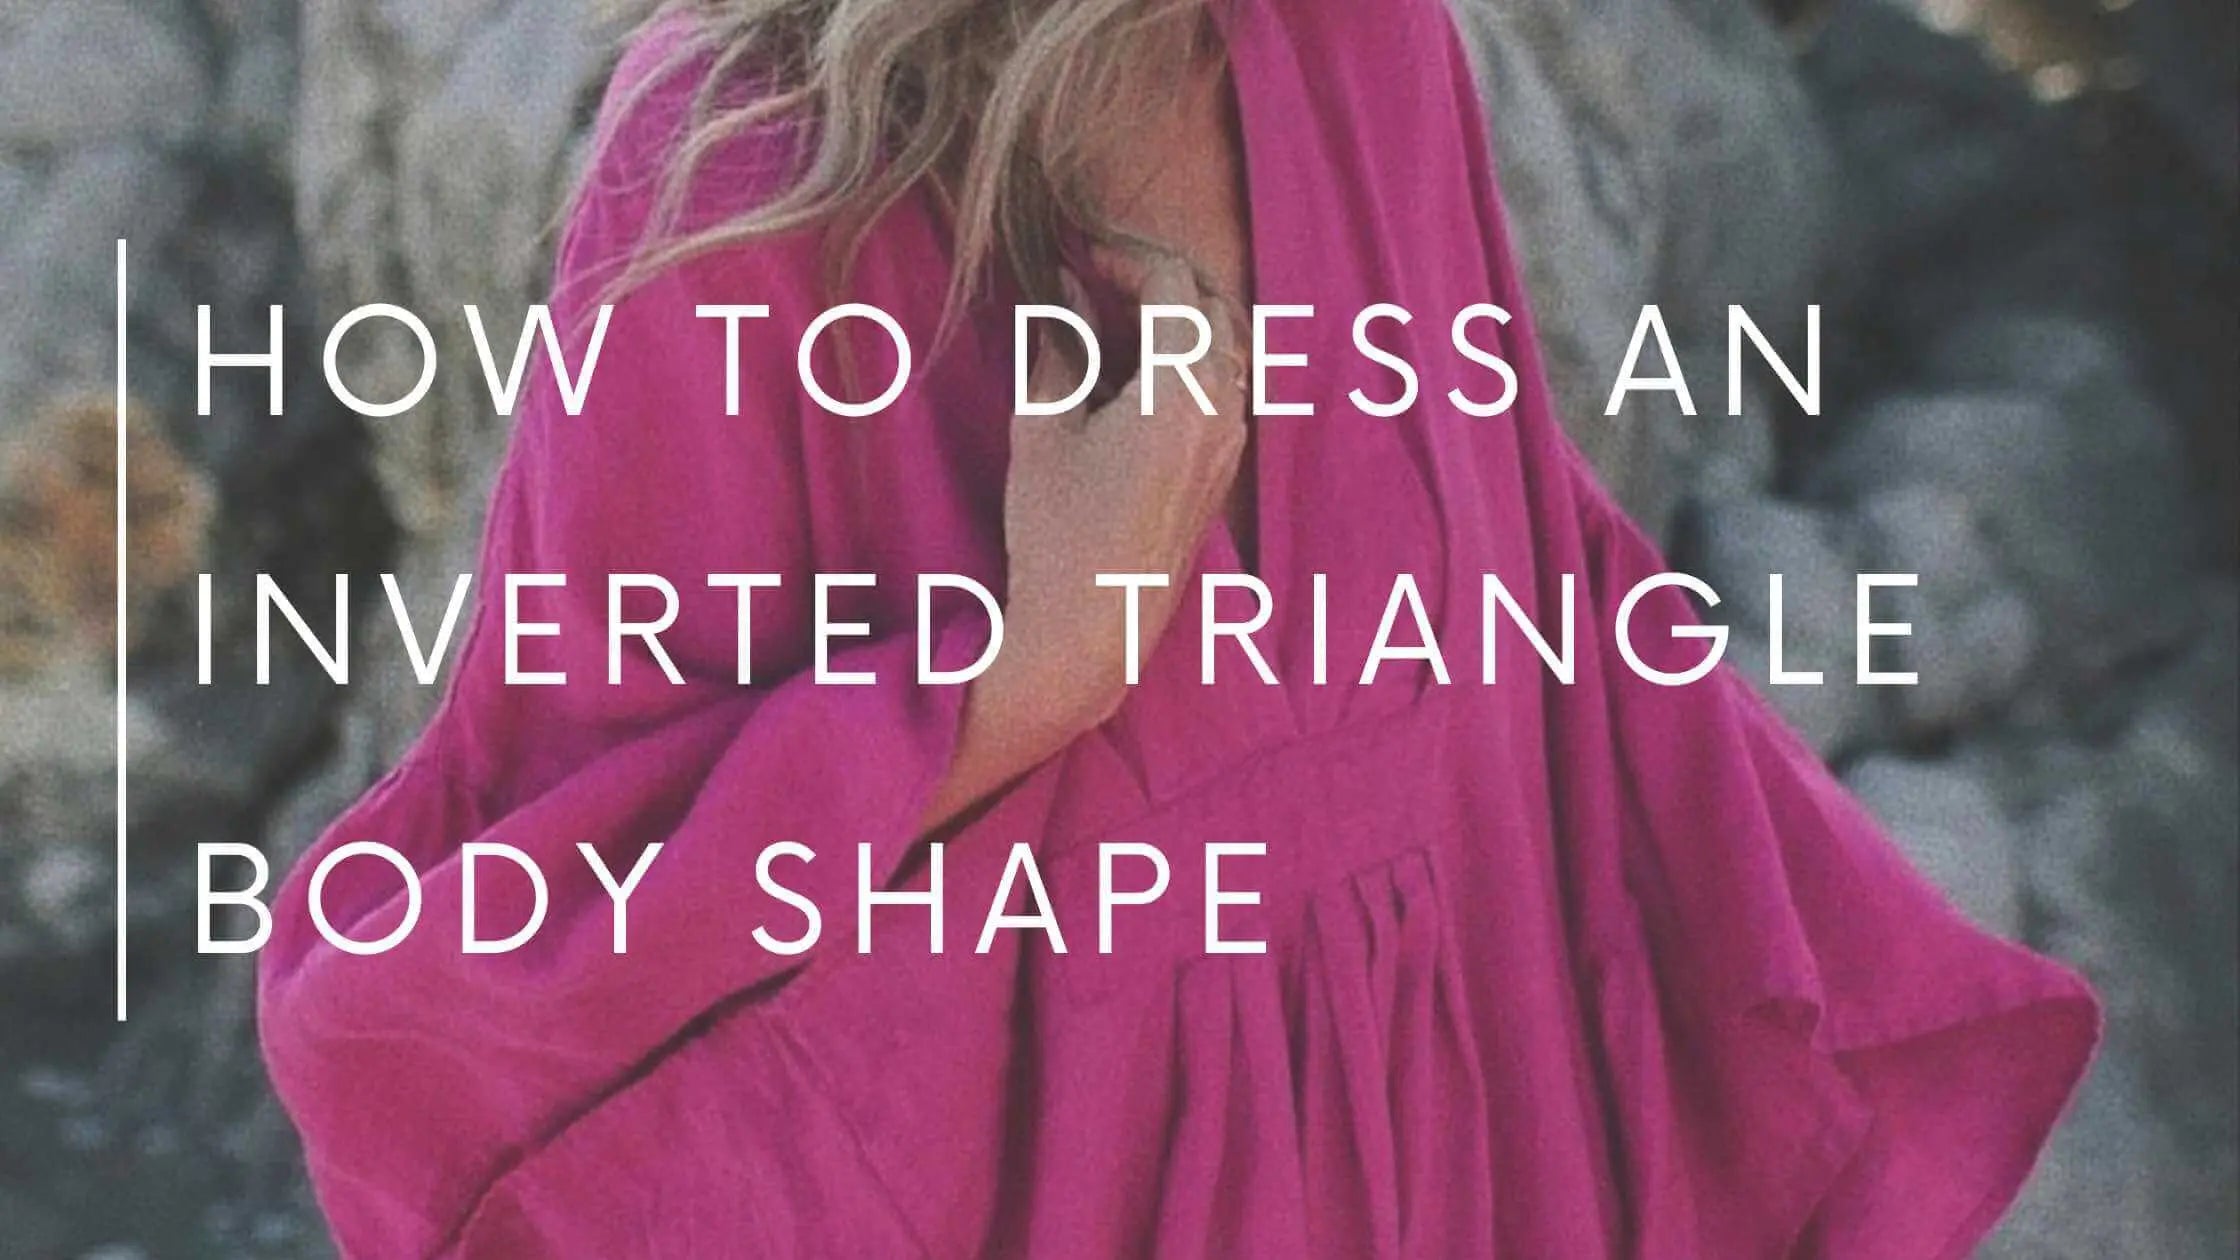 All about Angelina Jolie's body type, the inverted triangle